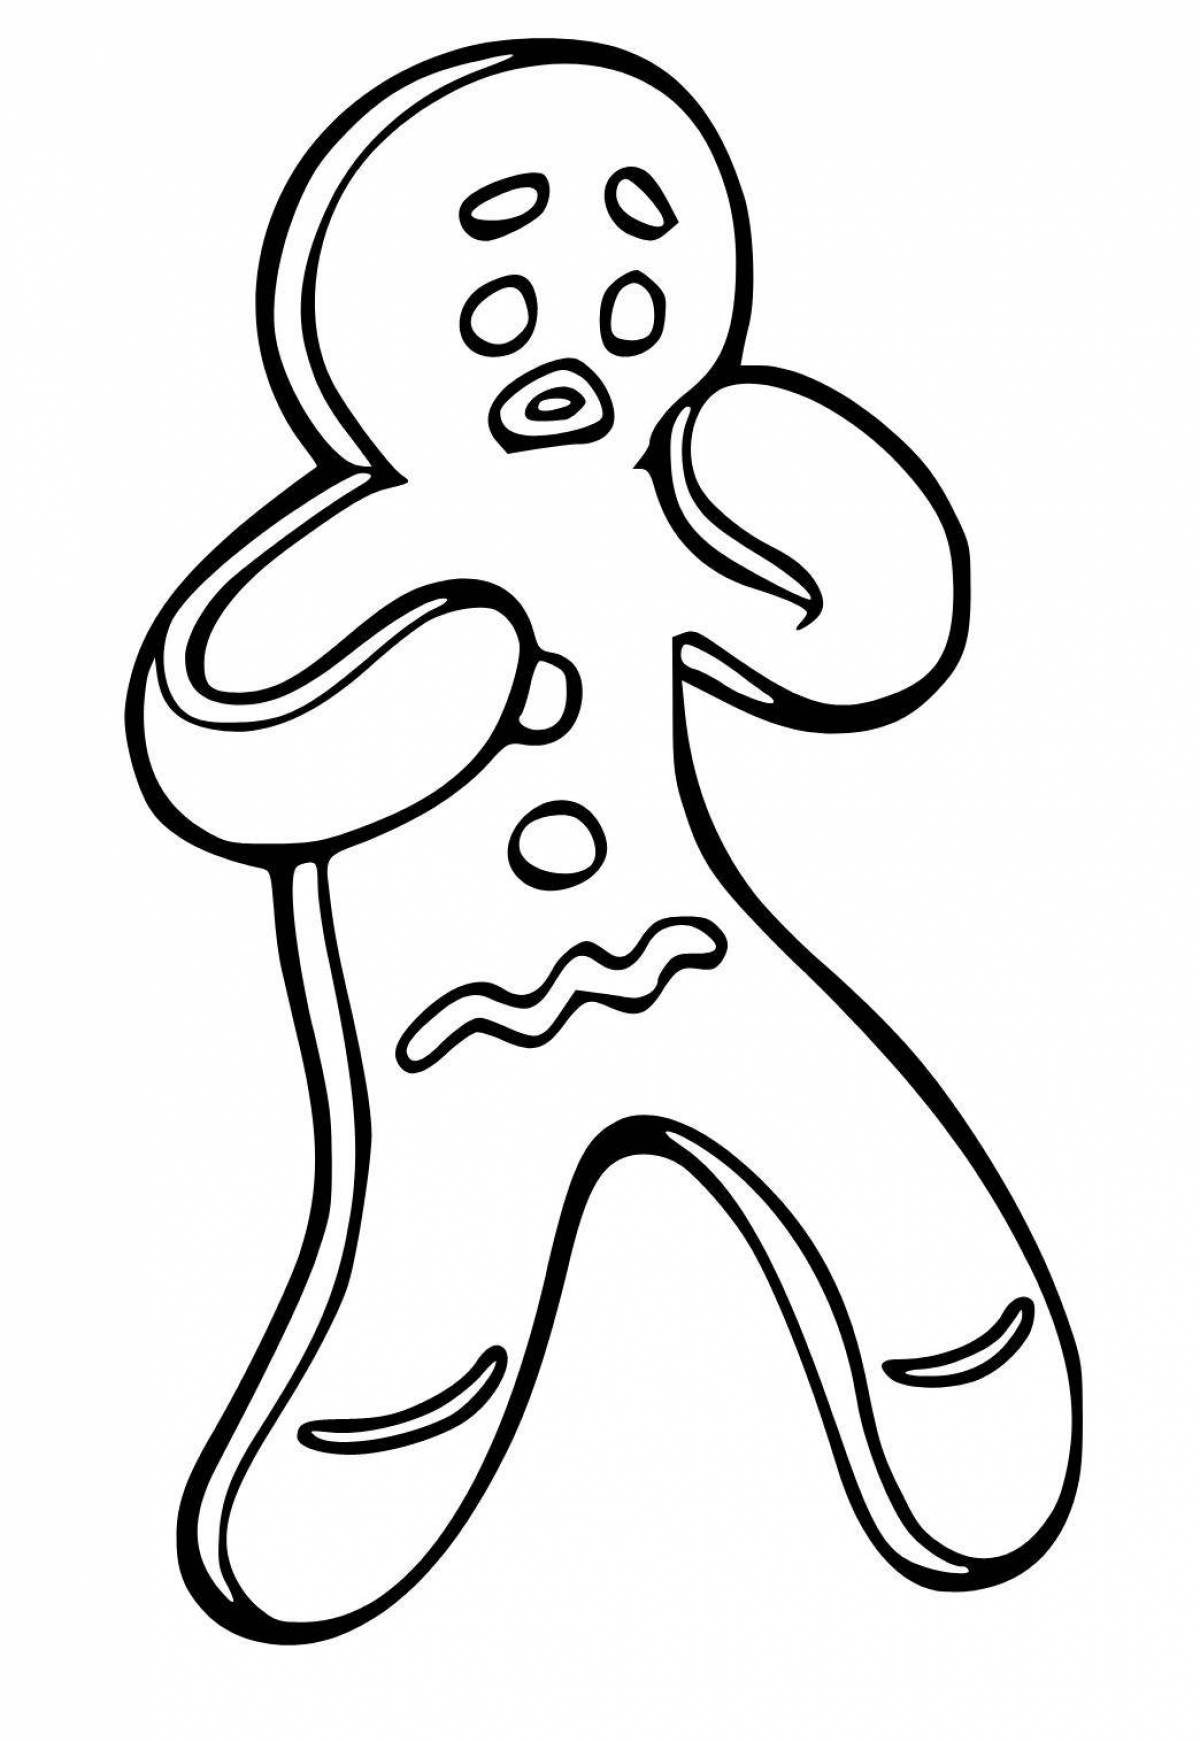 Gorgeous gingerbread man coloring page